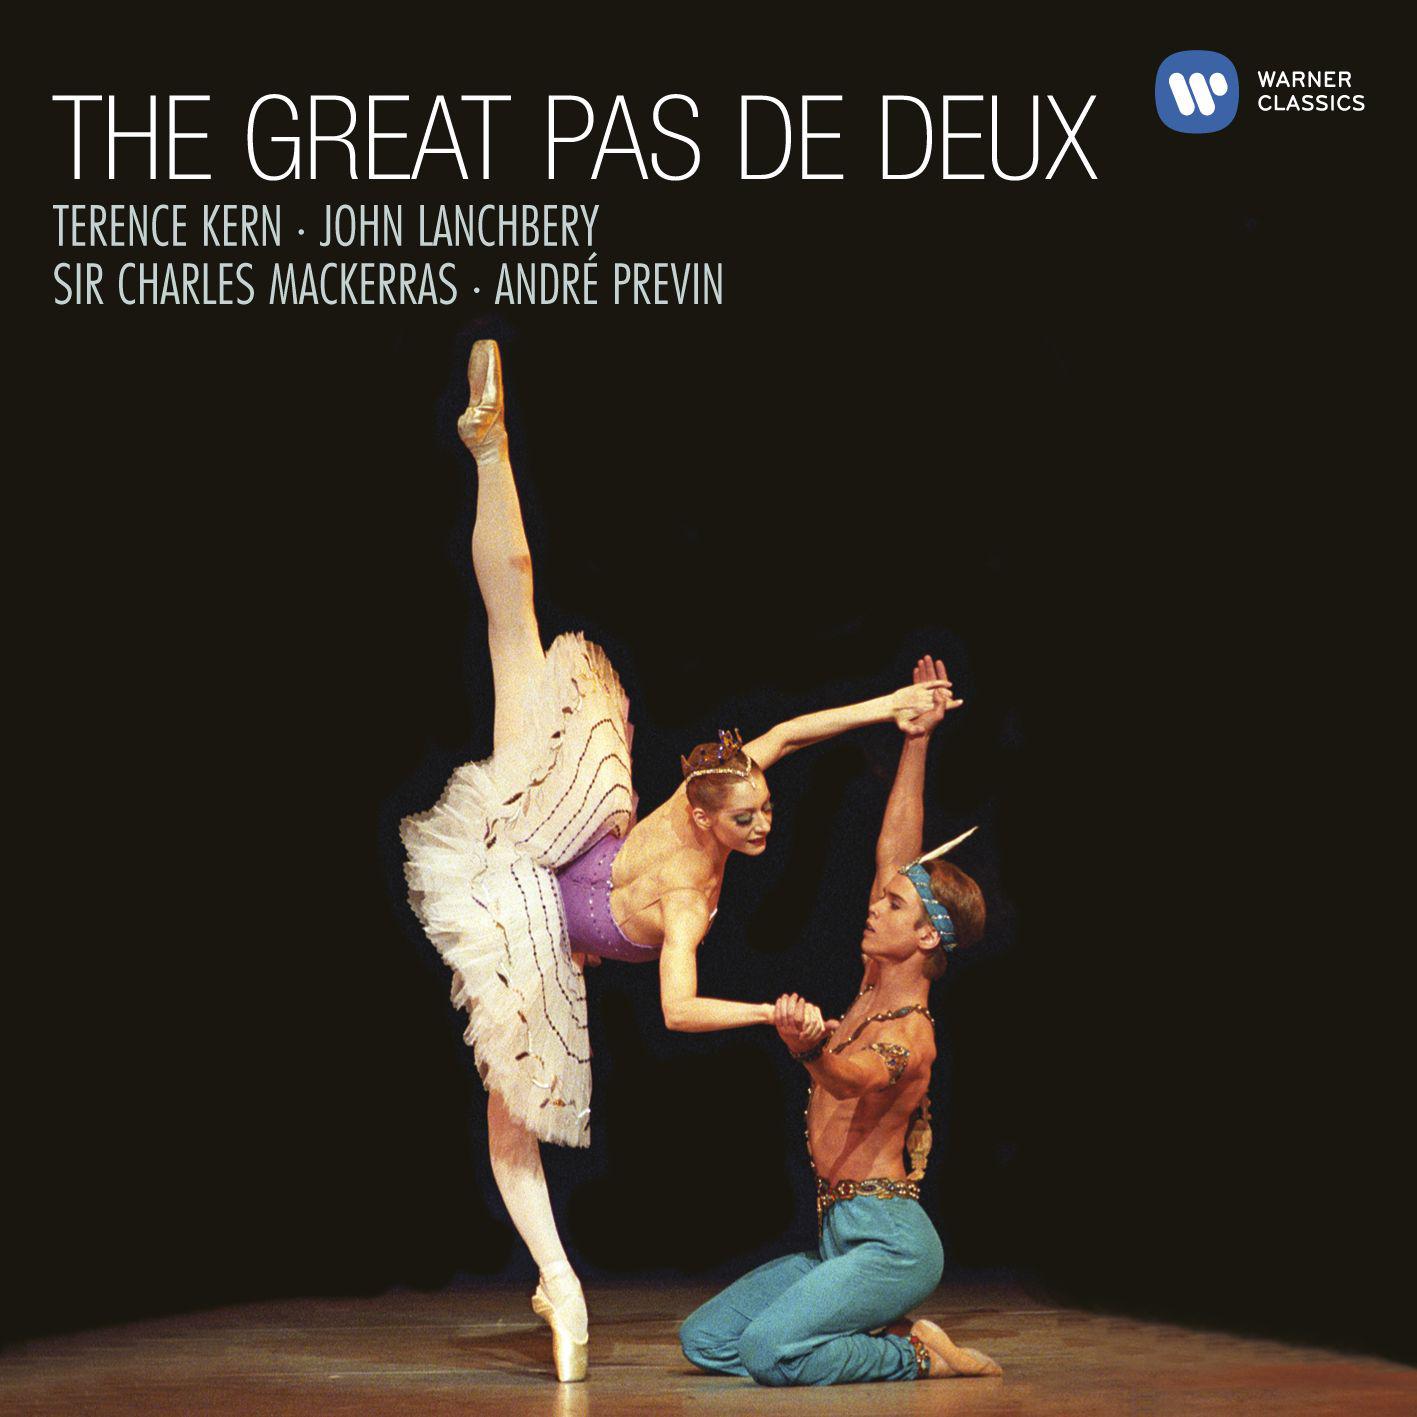 The Nutcracker, Op.71 (1992 Remastered Version), Act II, Pas de deux (The Prince and the Sugar-Plum Fairy): Variation II (Dance of the Sugar-Plum Fairy) - Coda